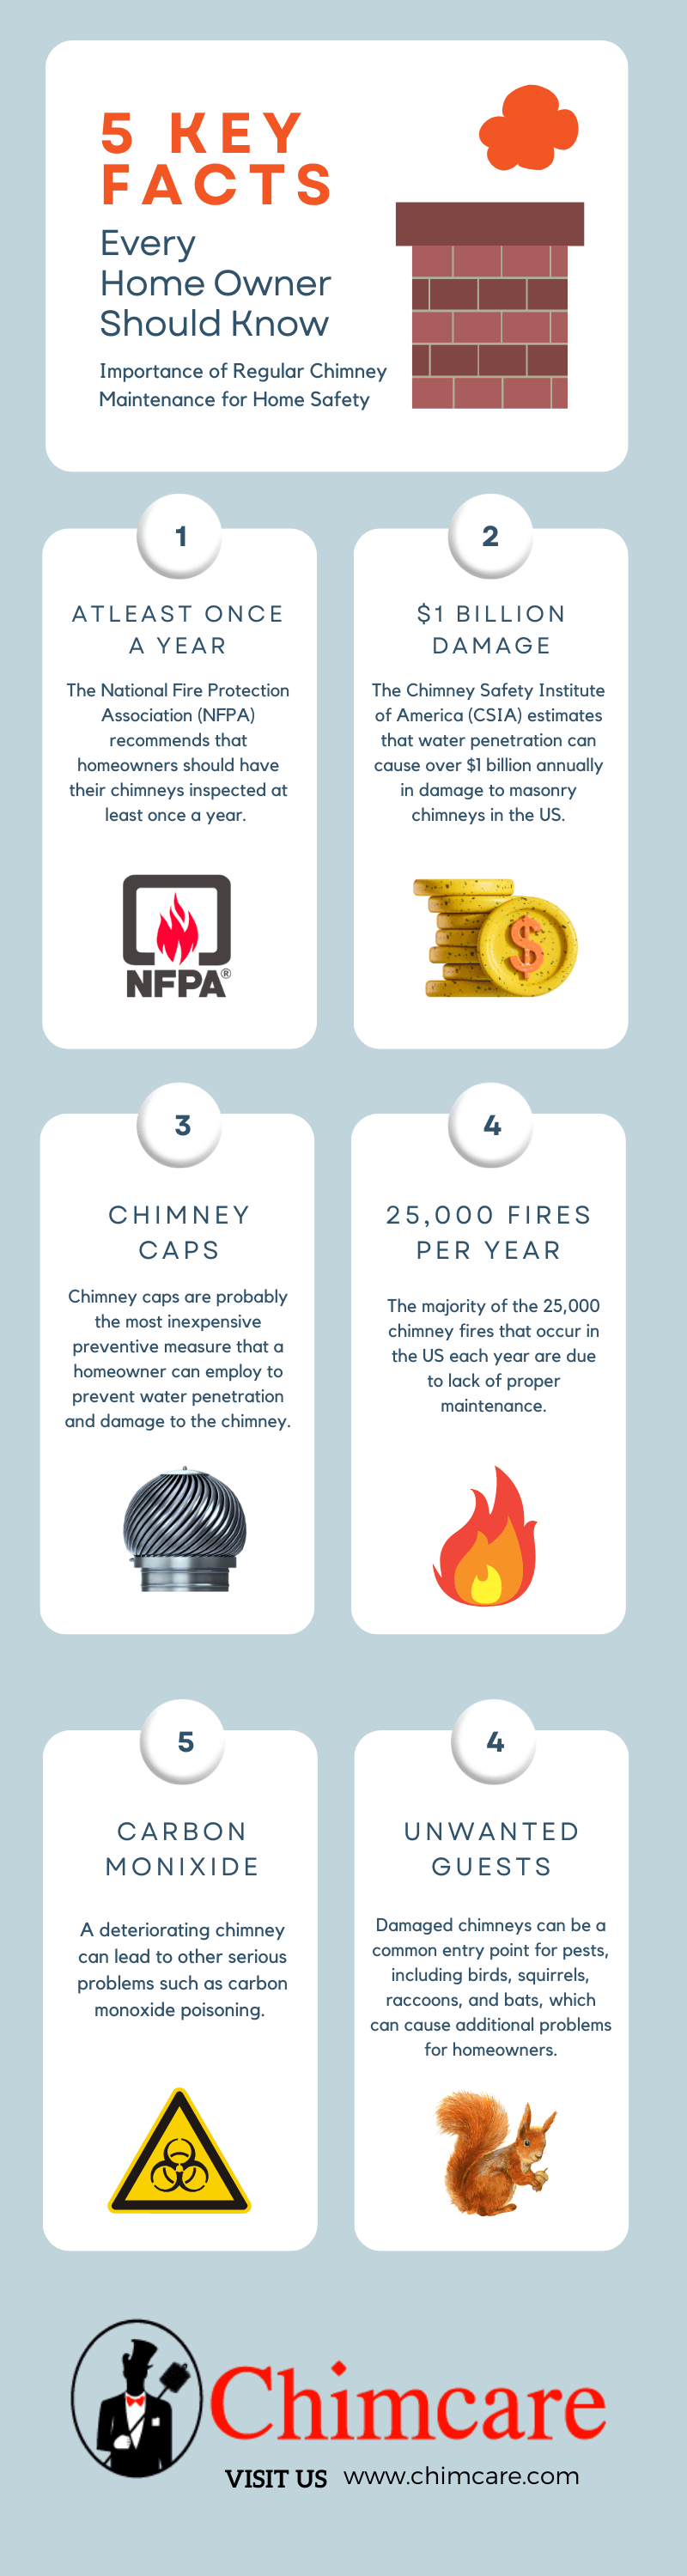 Infographic illustrating the crucial role of routine chimney upkeep in ensuring home safety